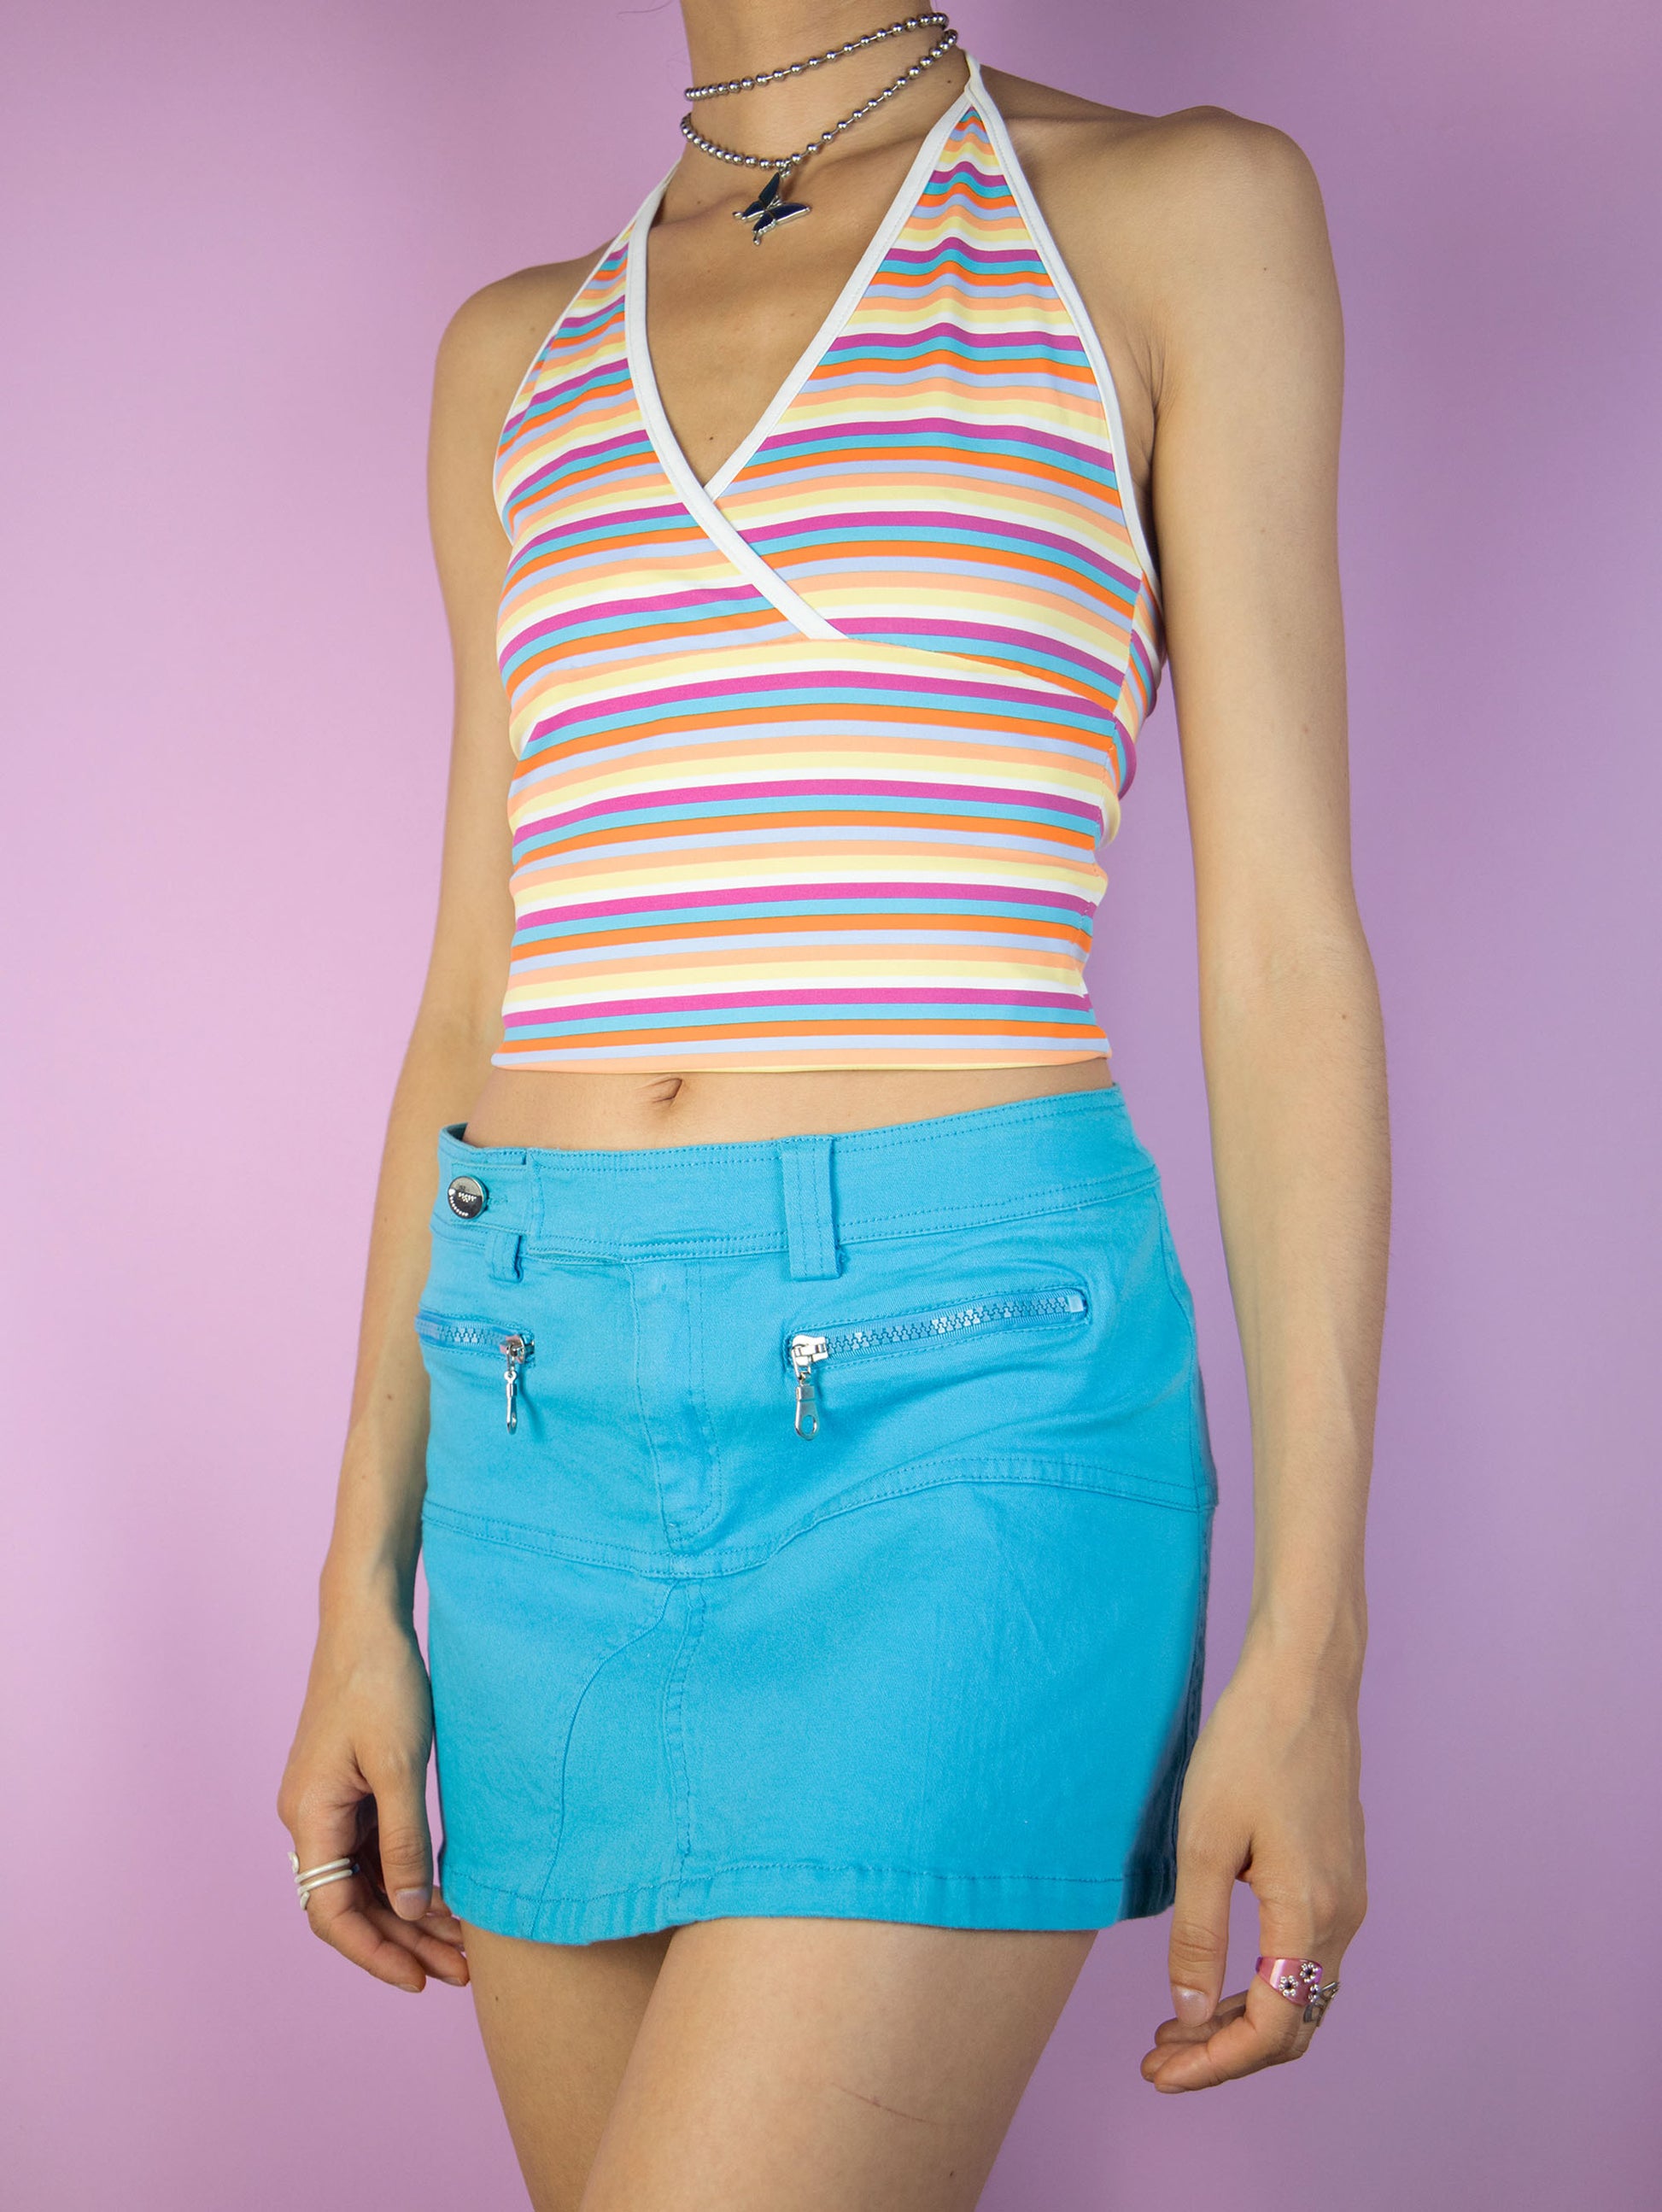 The Y2K Blue Low Rise Mini Skirt is a vintage low waisted blue elasticated skirt. Cyber grunge 2000s summer mini skirt.